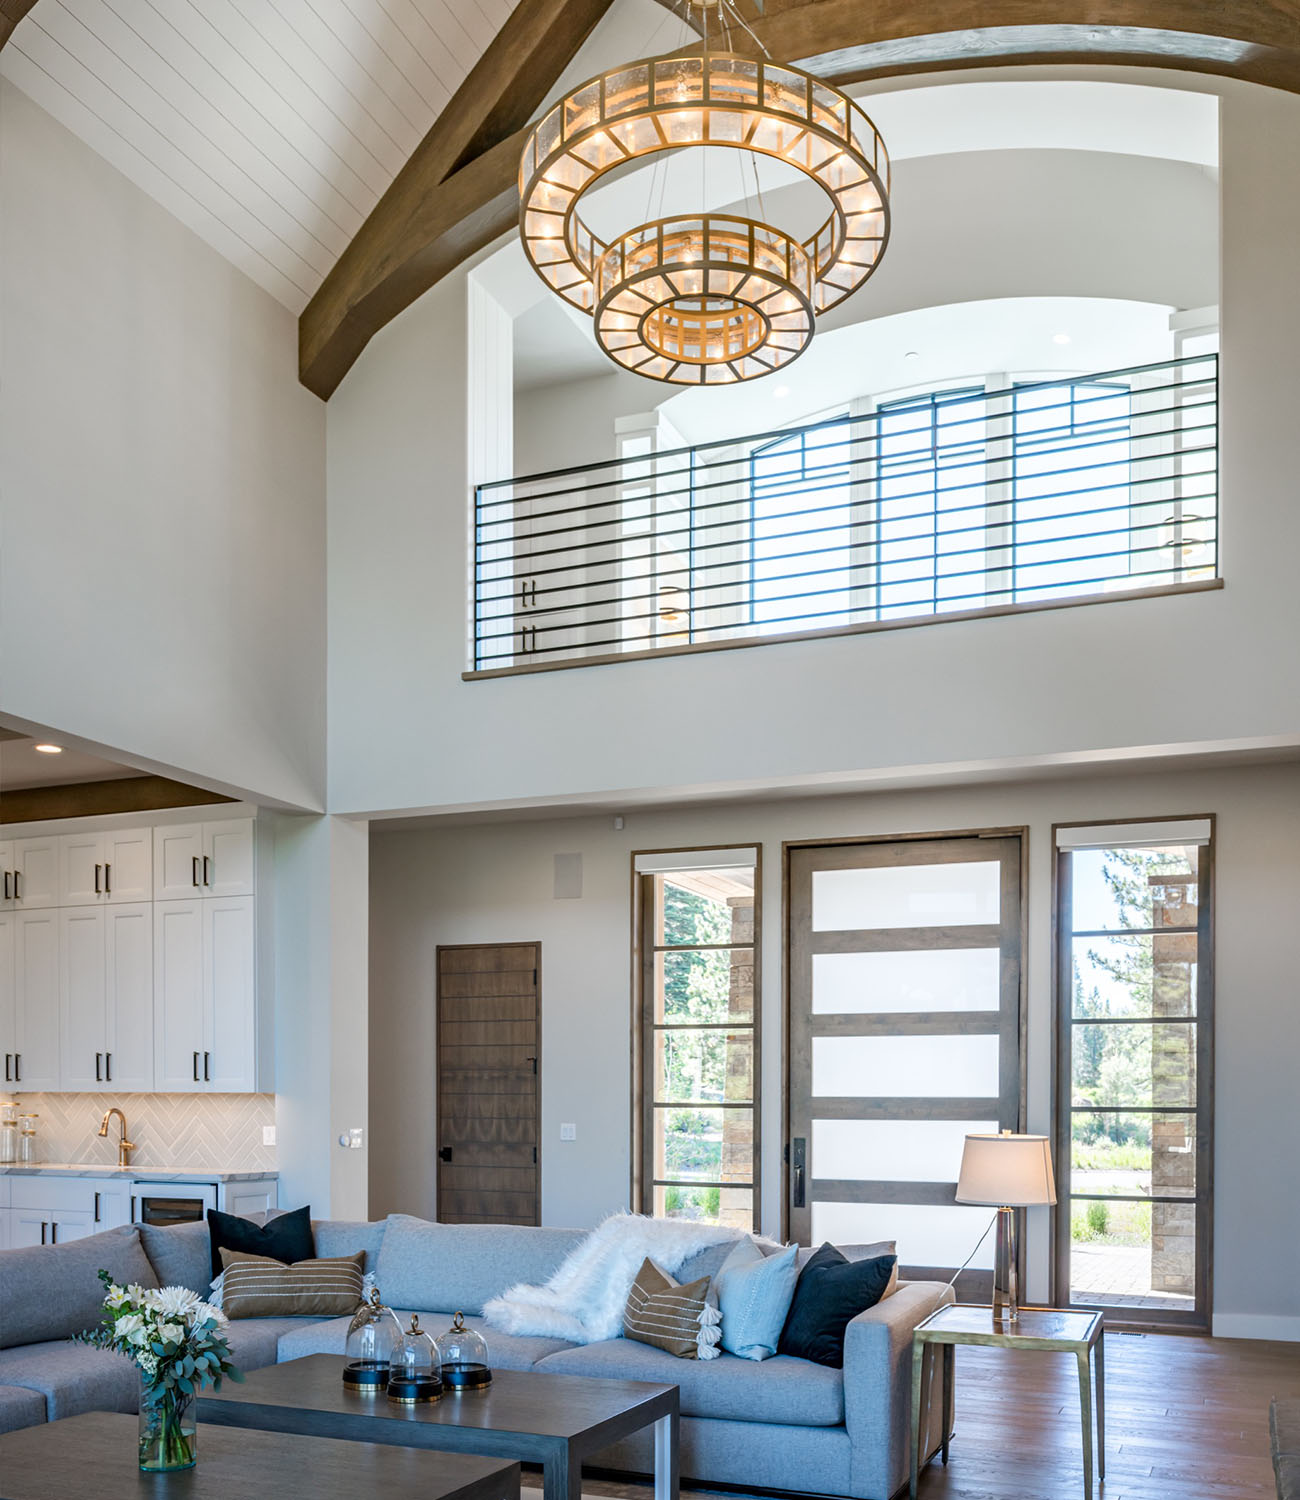 Transitional interior design from FiveWest